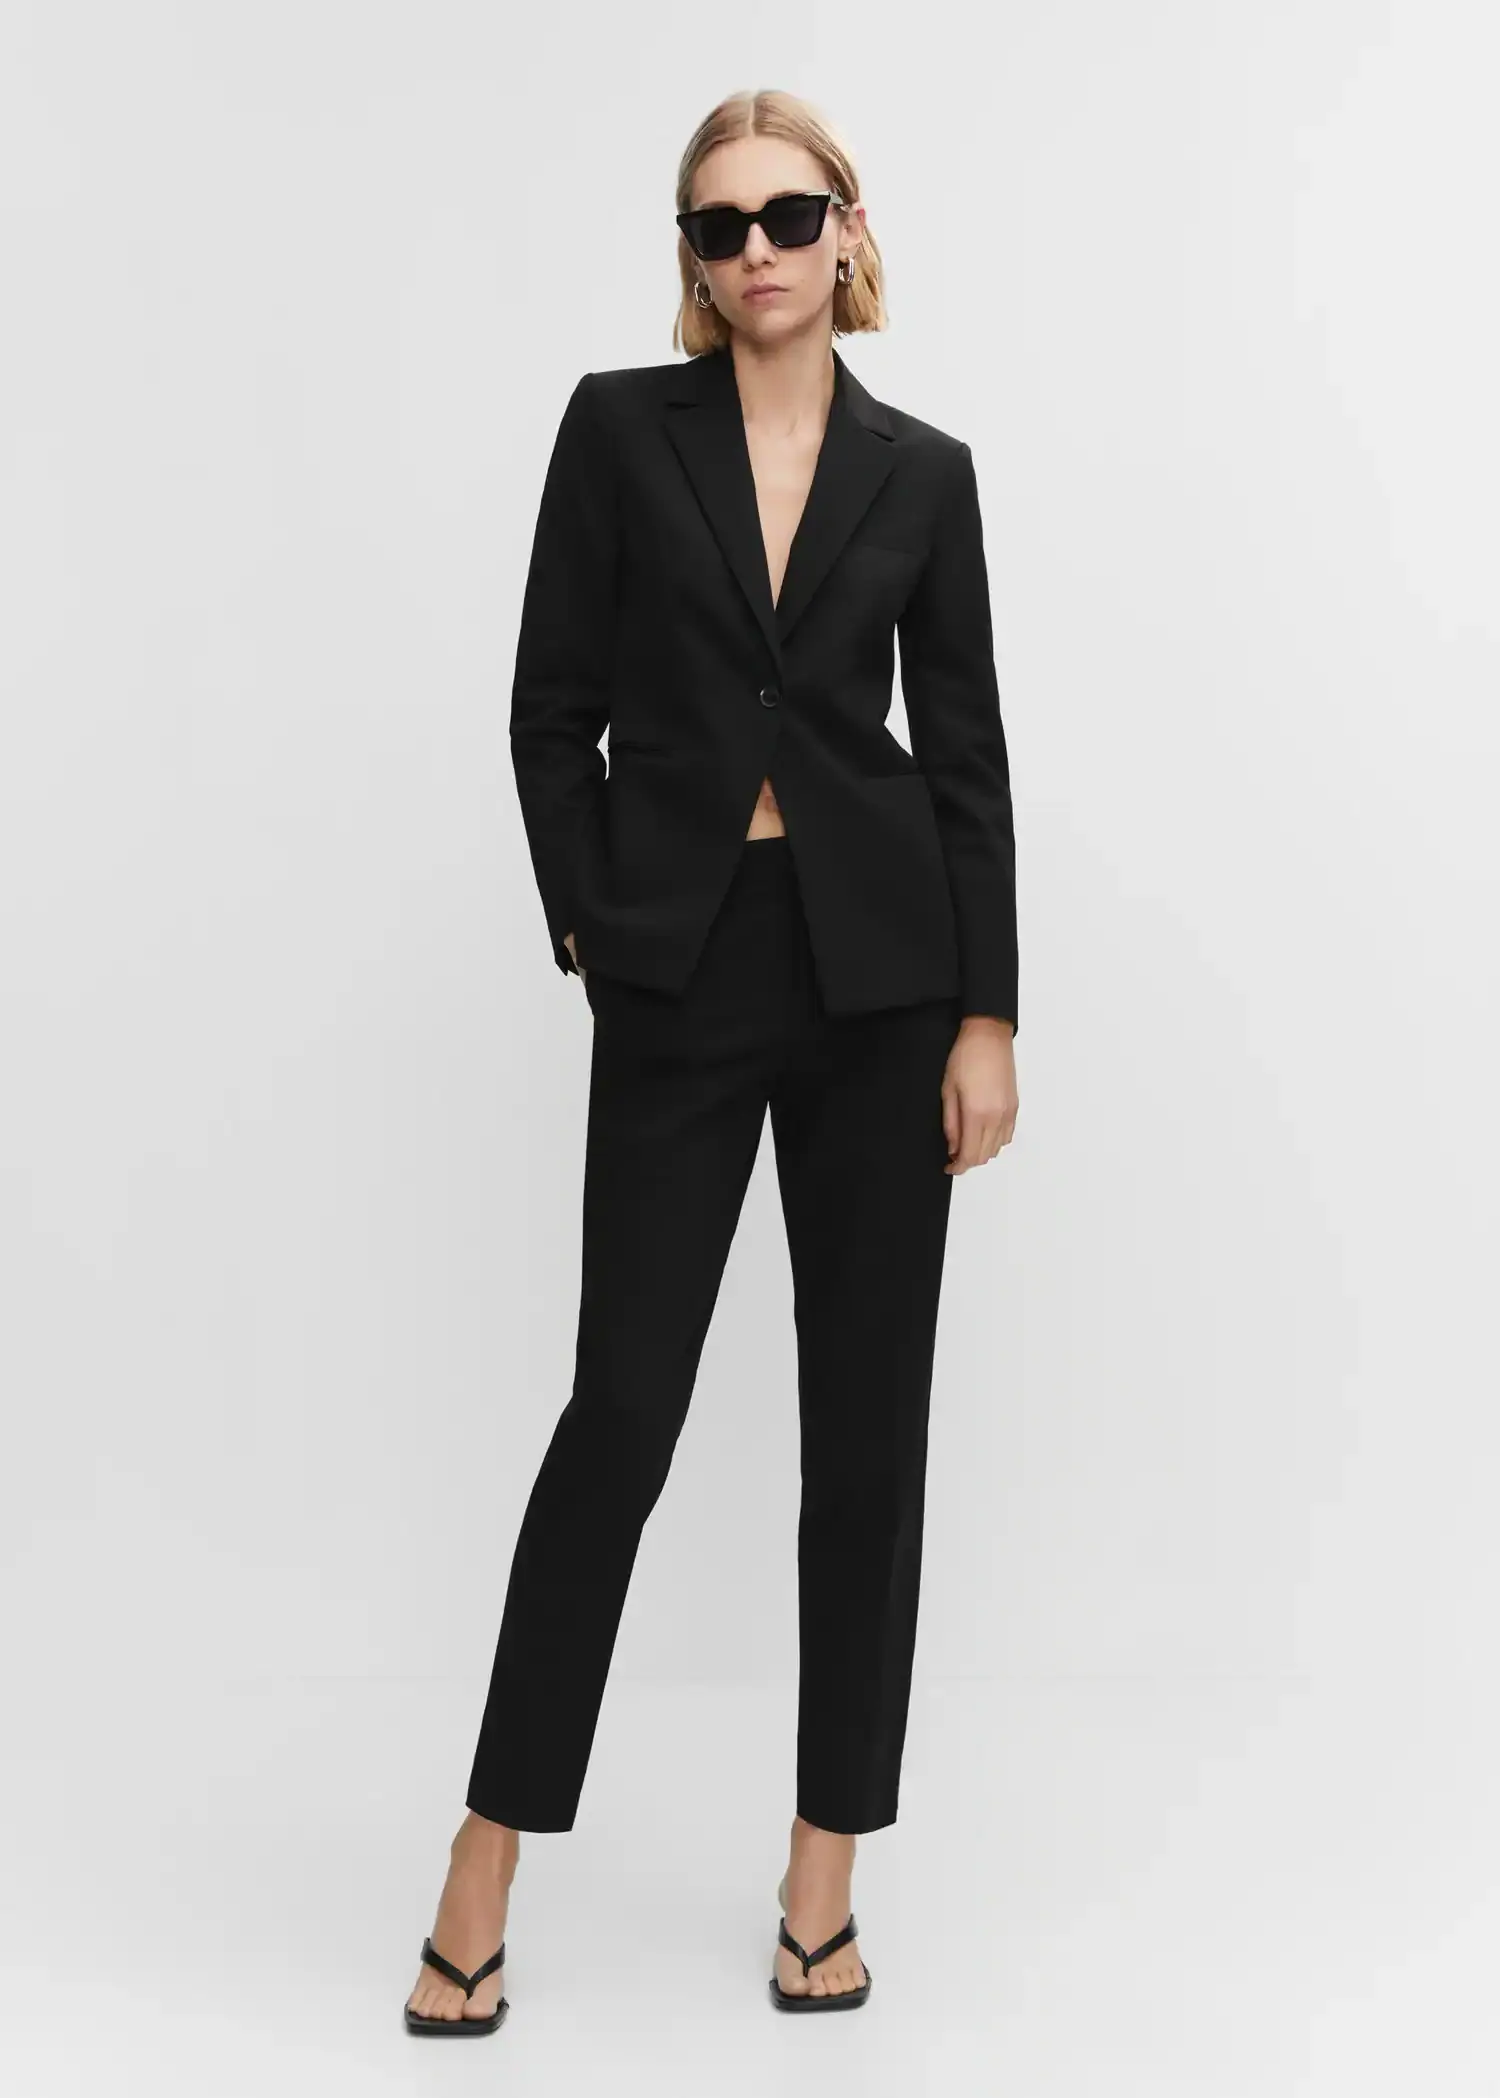 Mango Straight suit pants. a woman in a black suit standing in front of a white wall. 